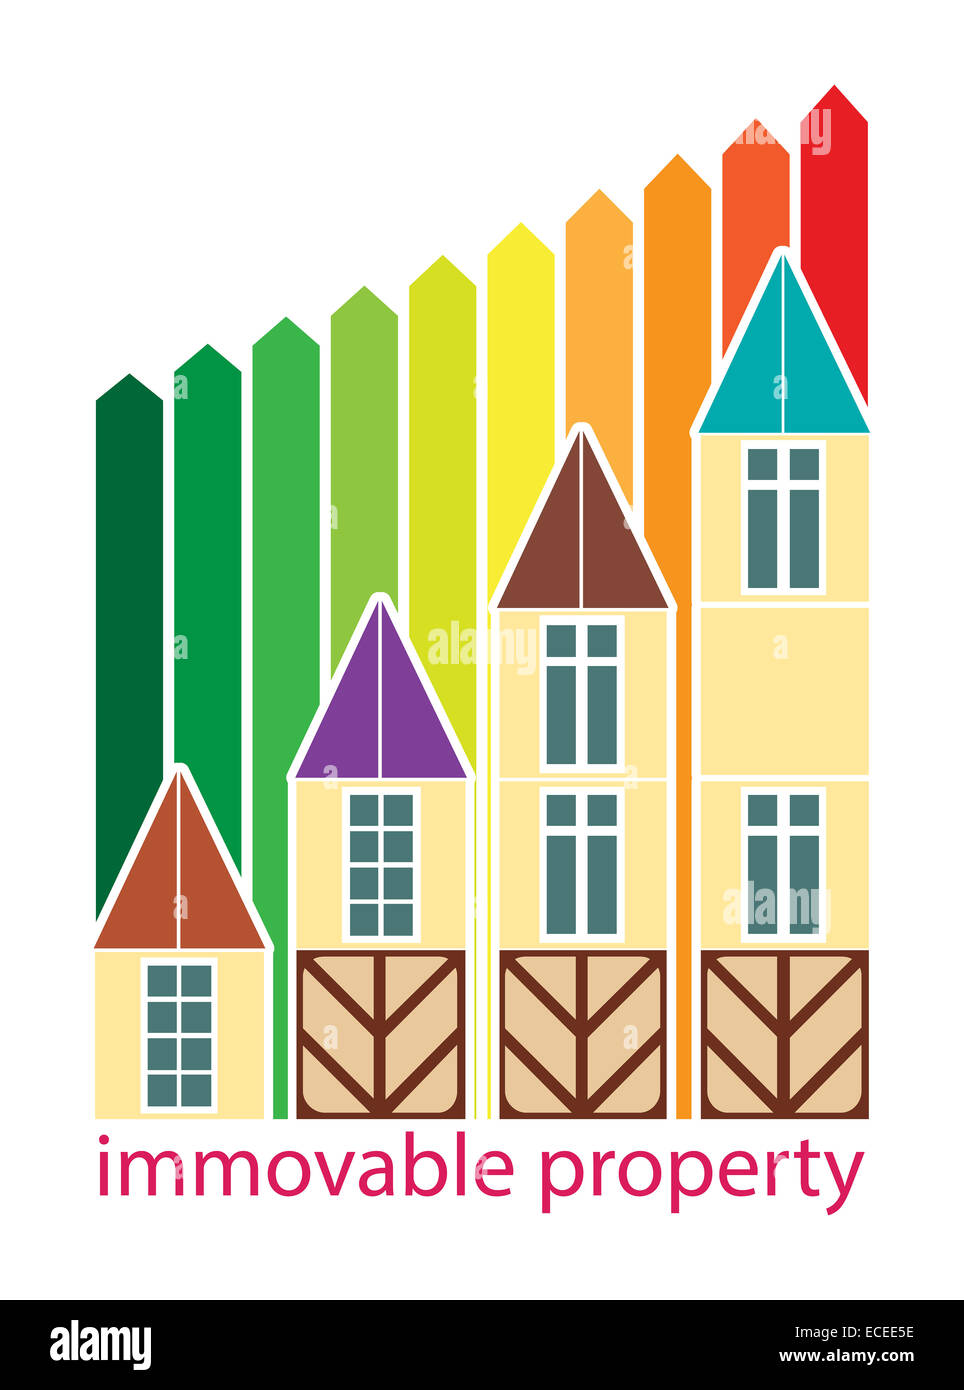 immovable property Stock Photo